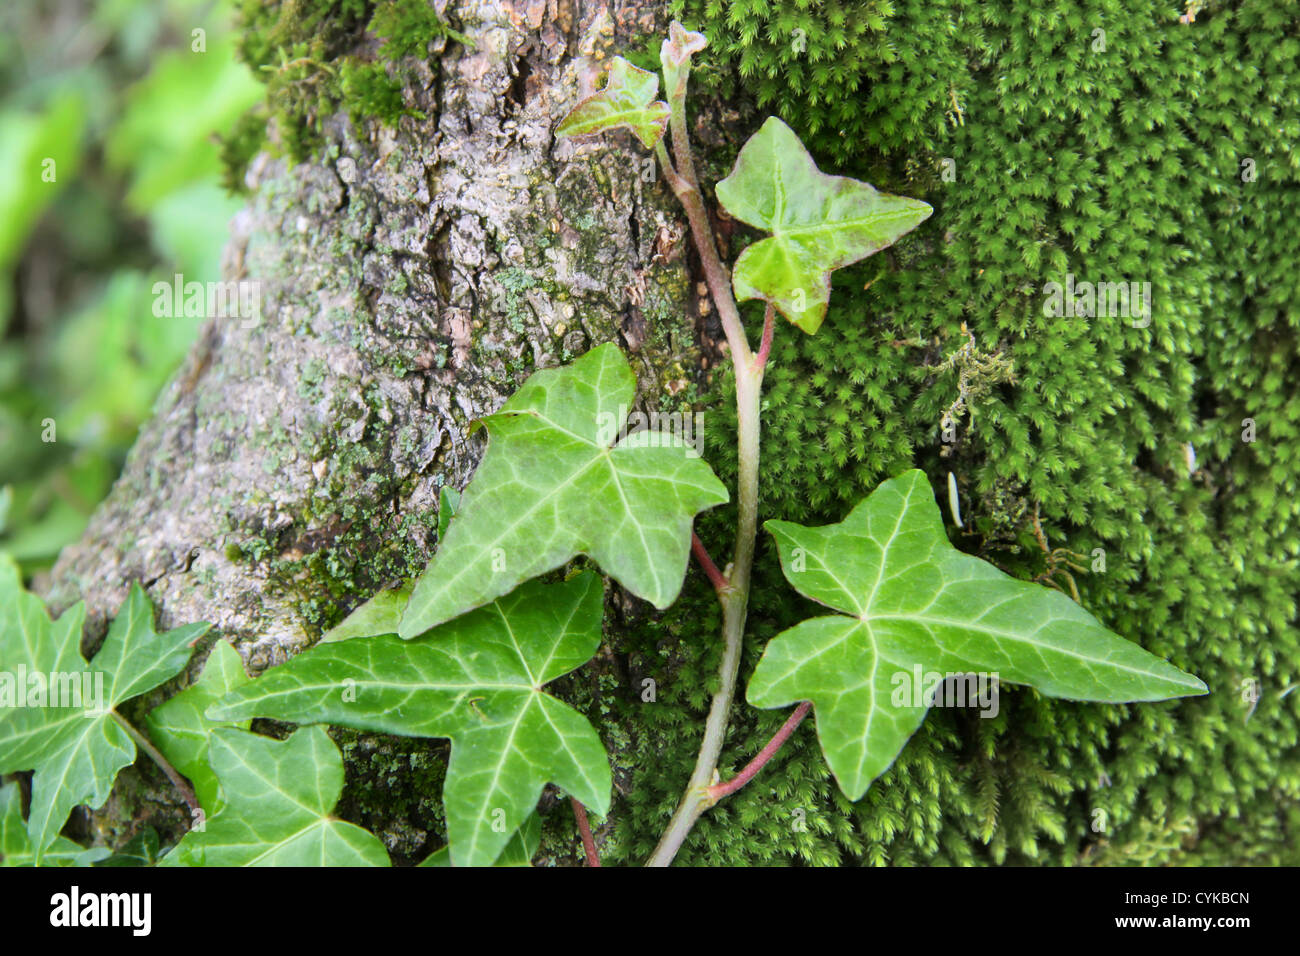 Close-up of young fern on tree trunk Stock Photo